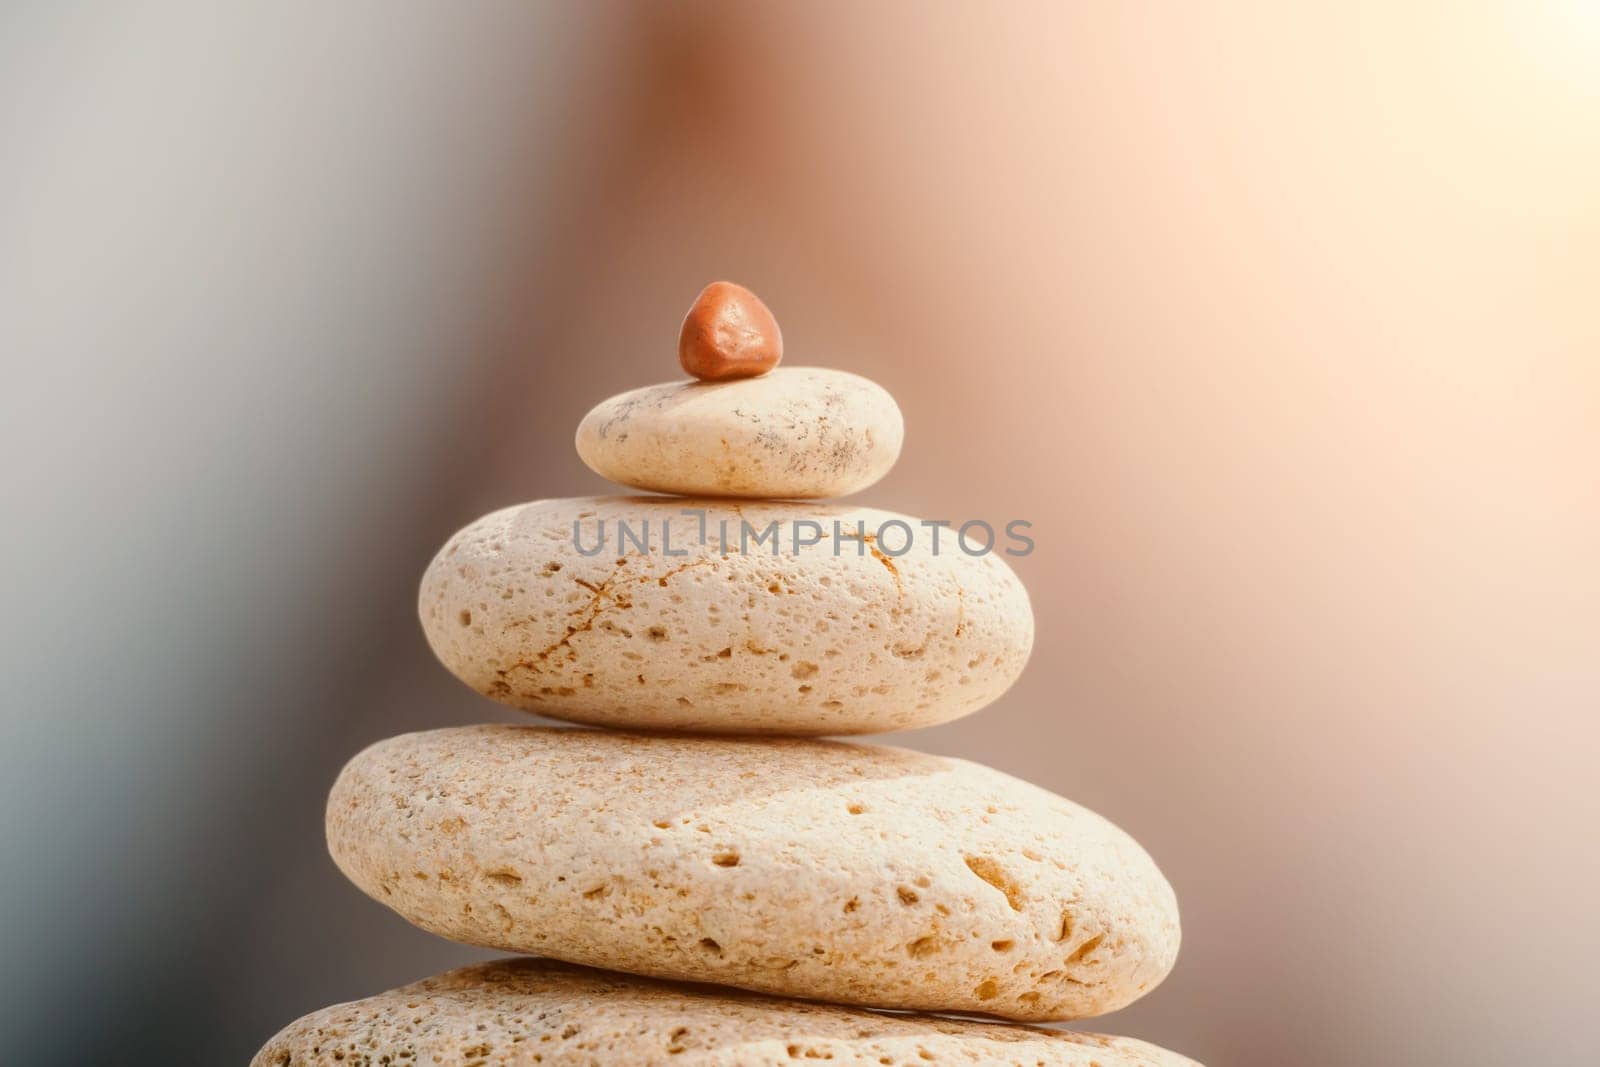 Pyramid stones on the seashore with warm sunset on the sea background. Happy holidays. Pebble beach, calm sea, travel destination. Concept of happy vacation on the sea, meditation, spa, calmness.